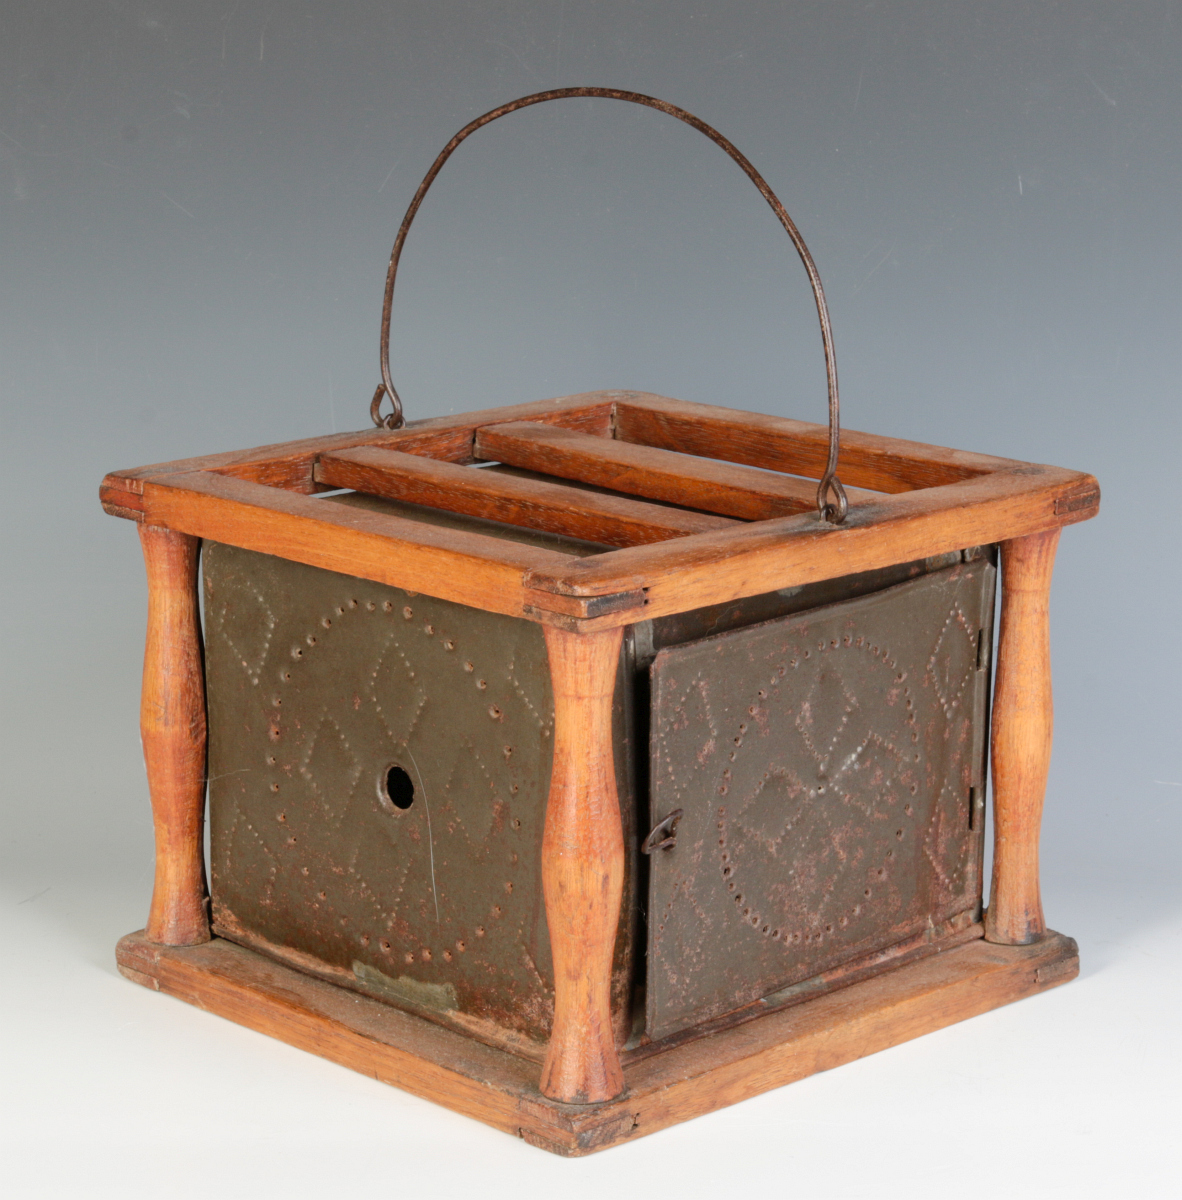 A 19TH C. WOOD FRAME FOOT WARMER WITH PUNCHED TINS